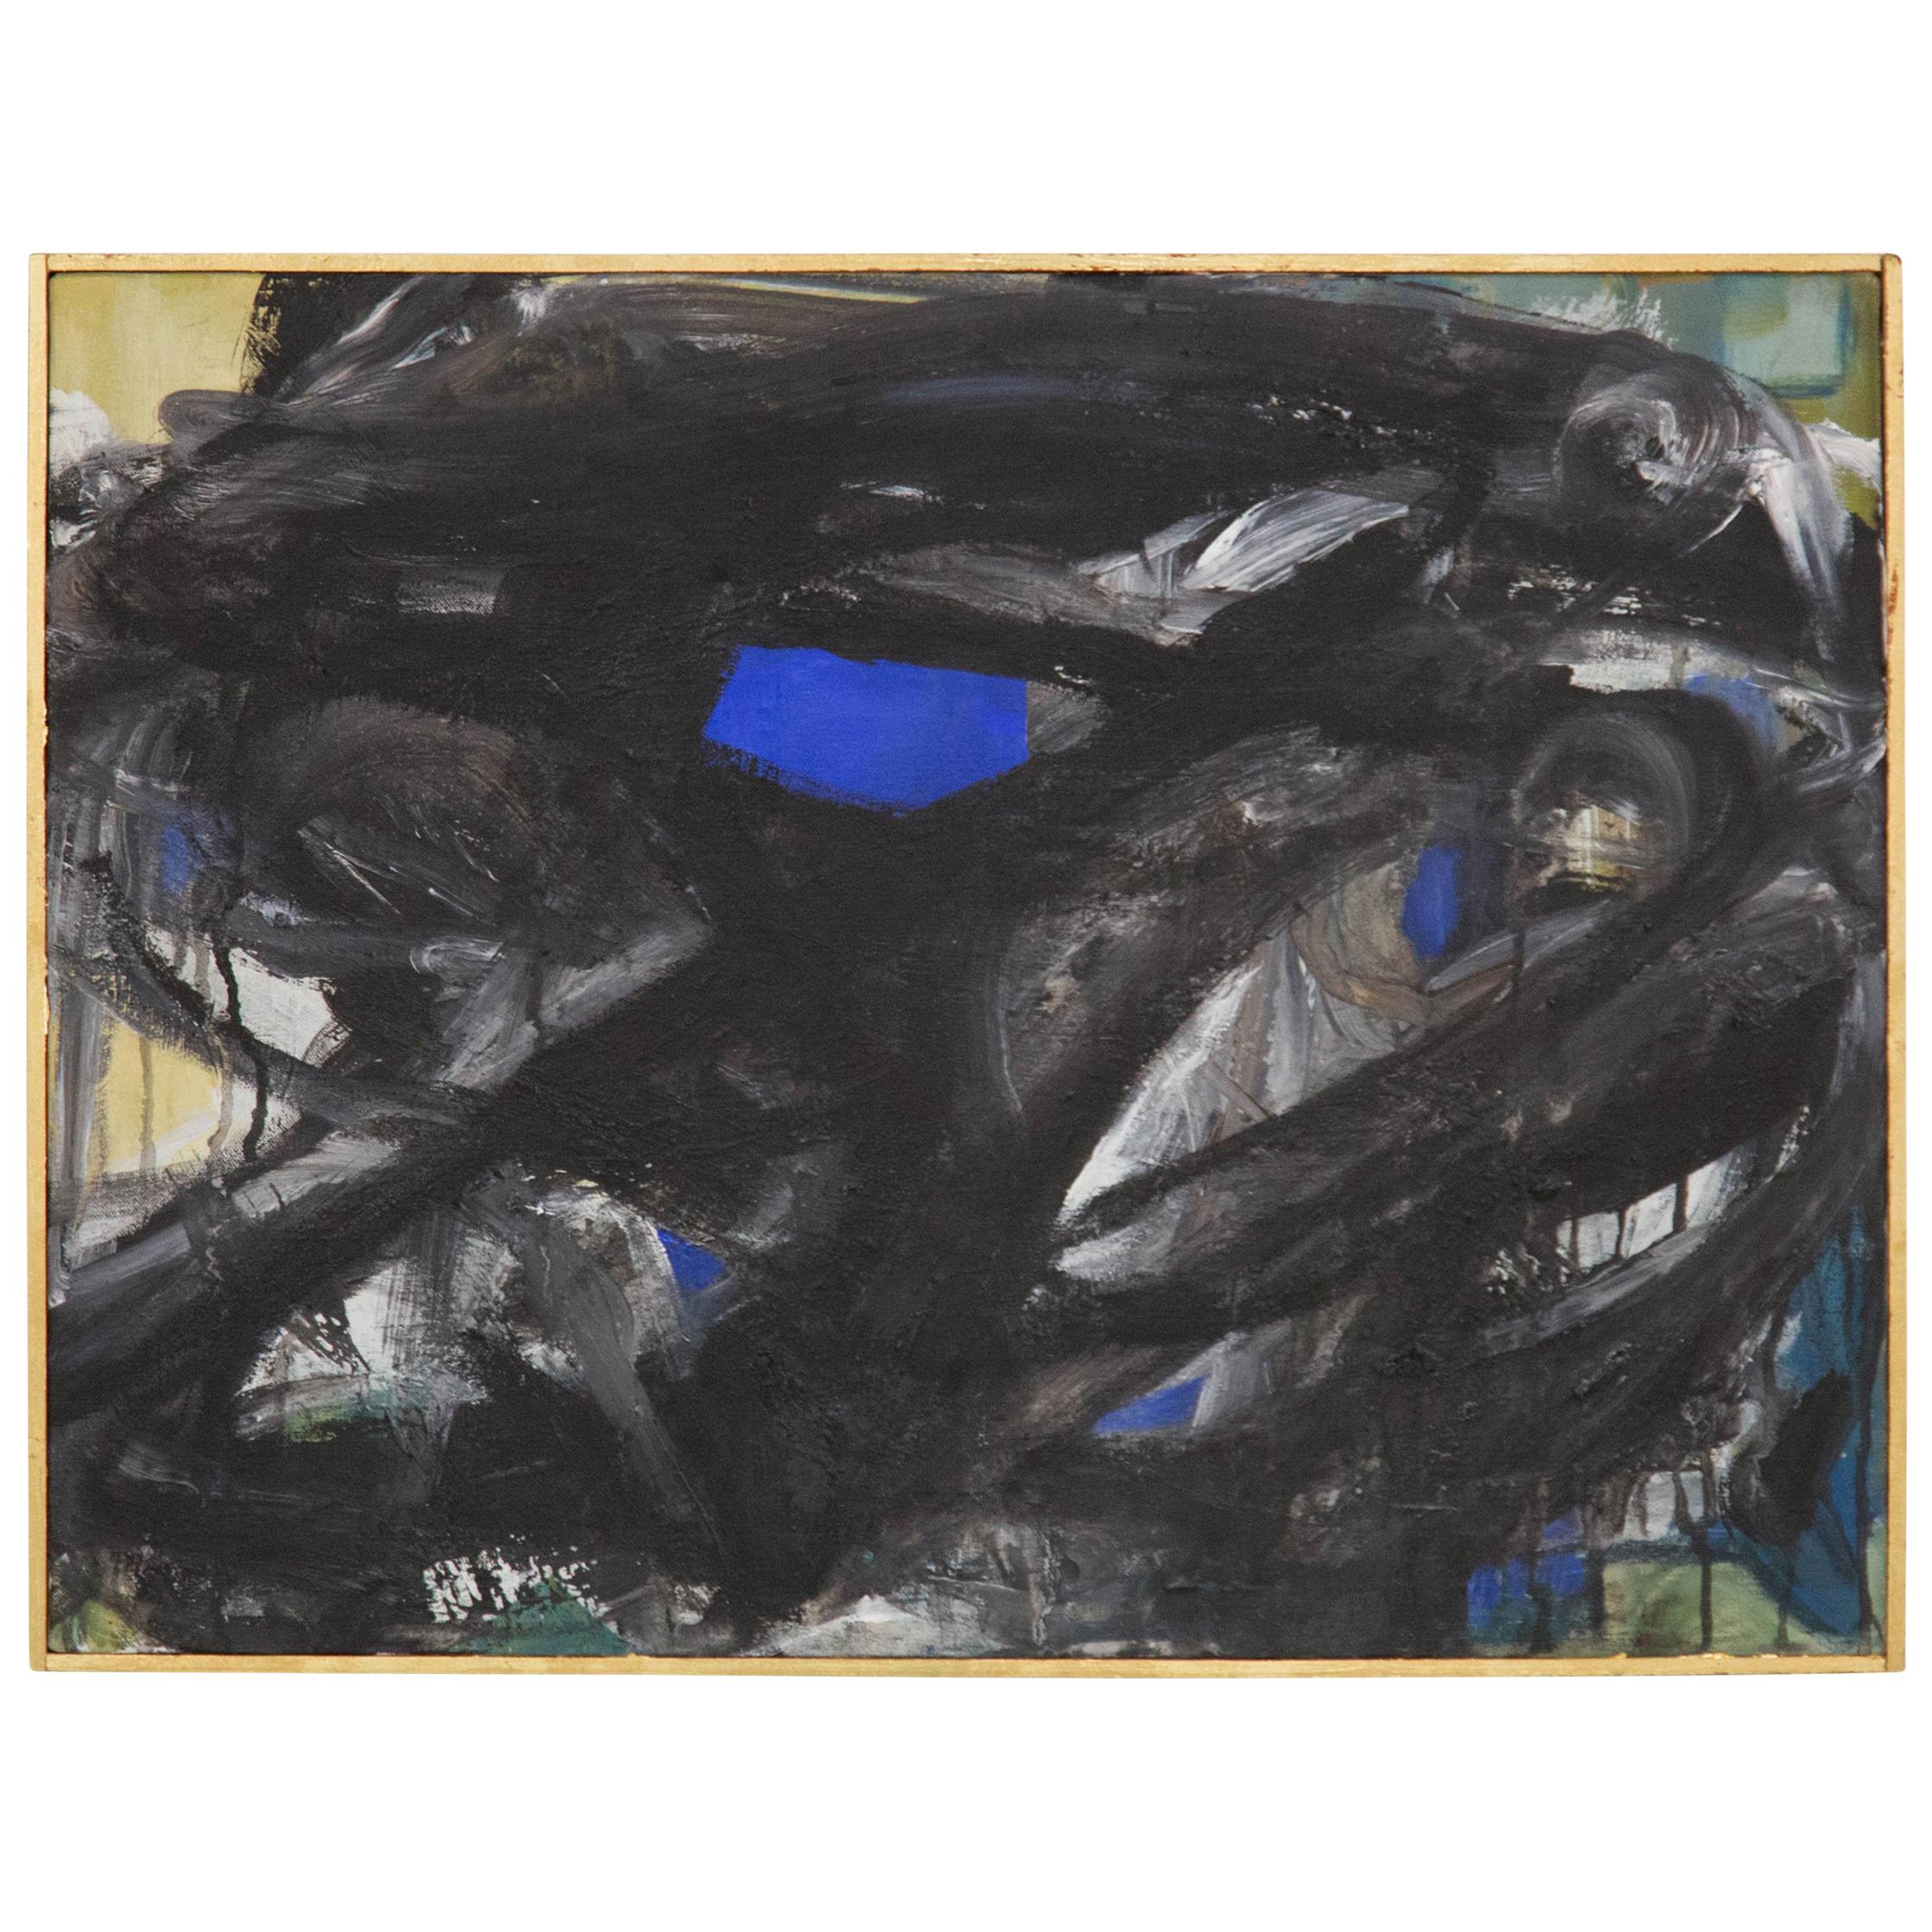 Gur Ny, Black and White Abstract Expressionist Painting, 1968